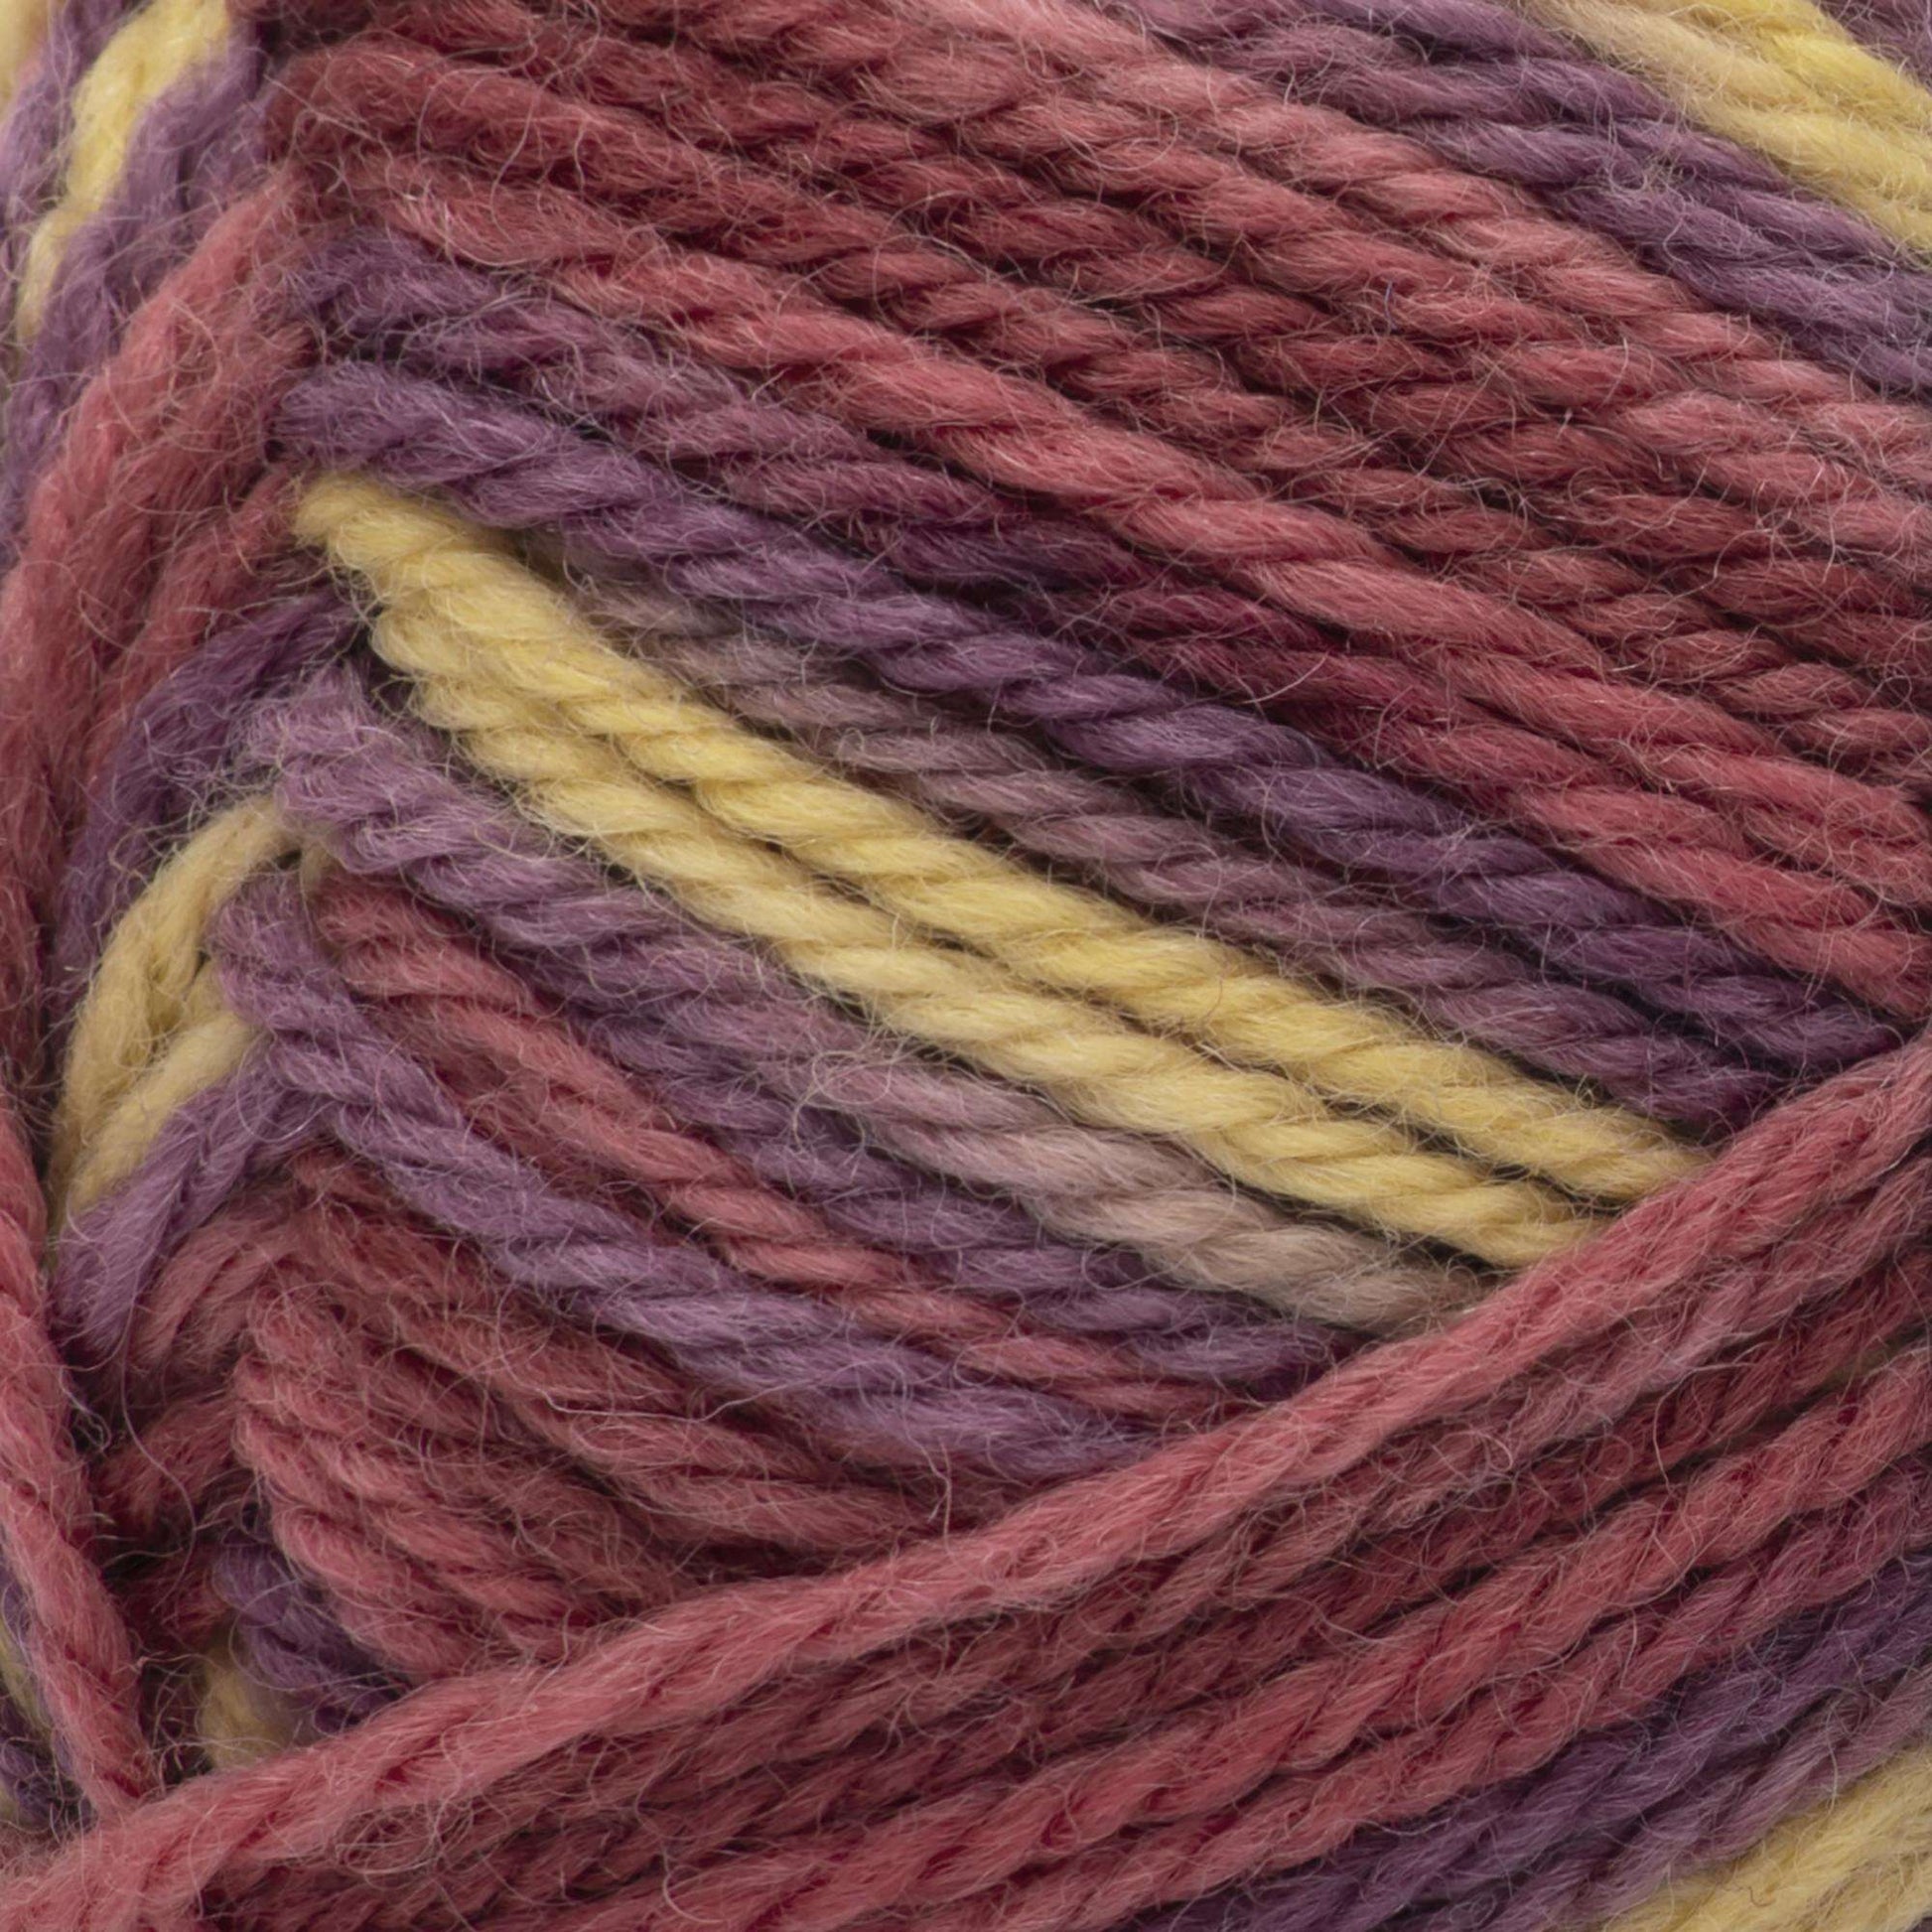 Patons Classic Wool Worsted Yarn Sunset